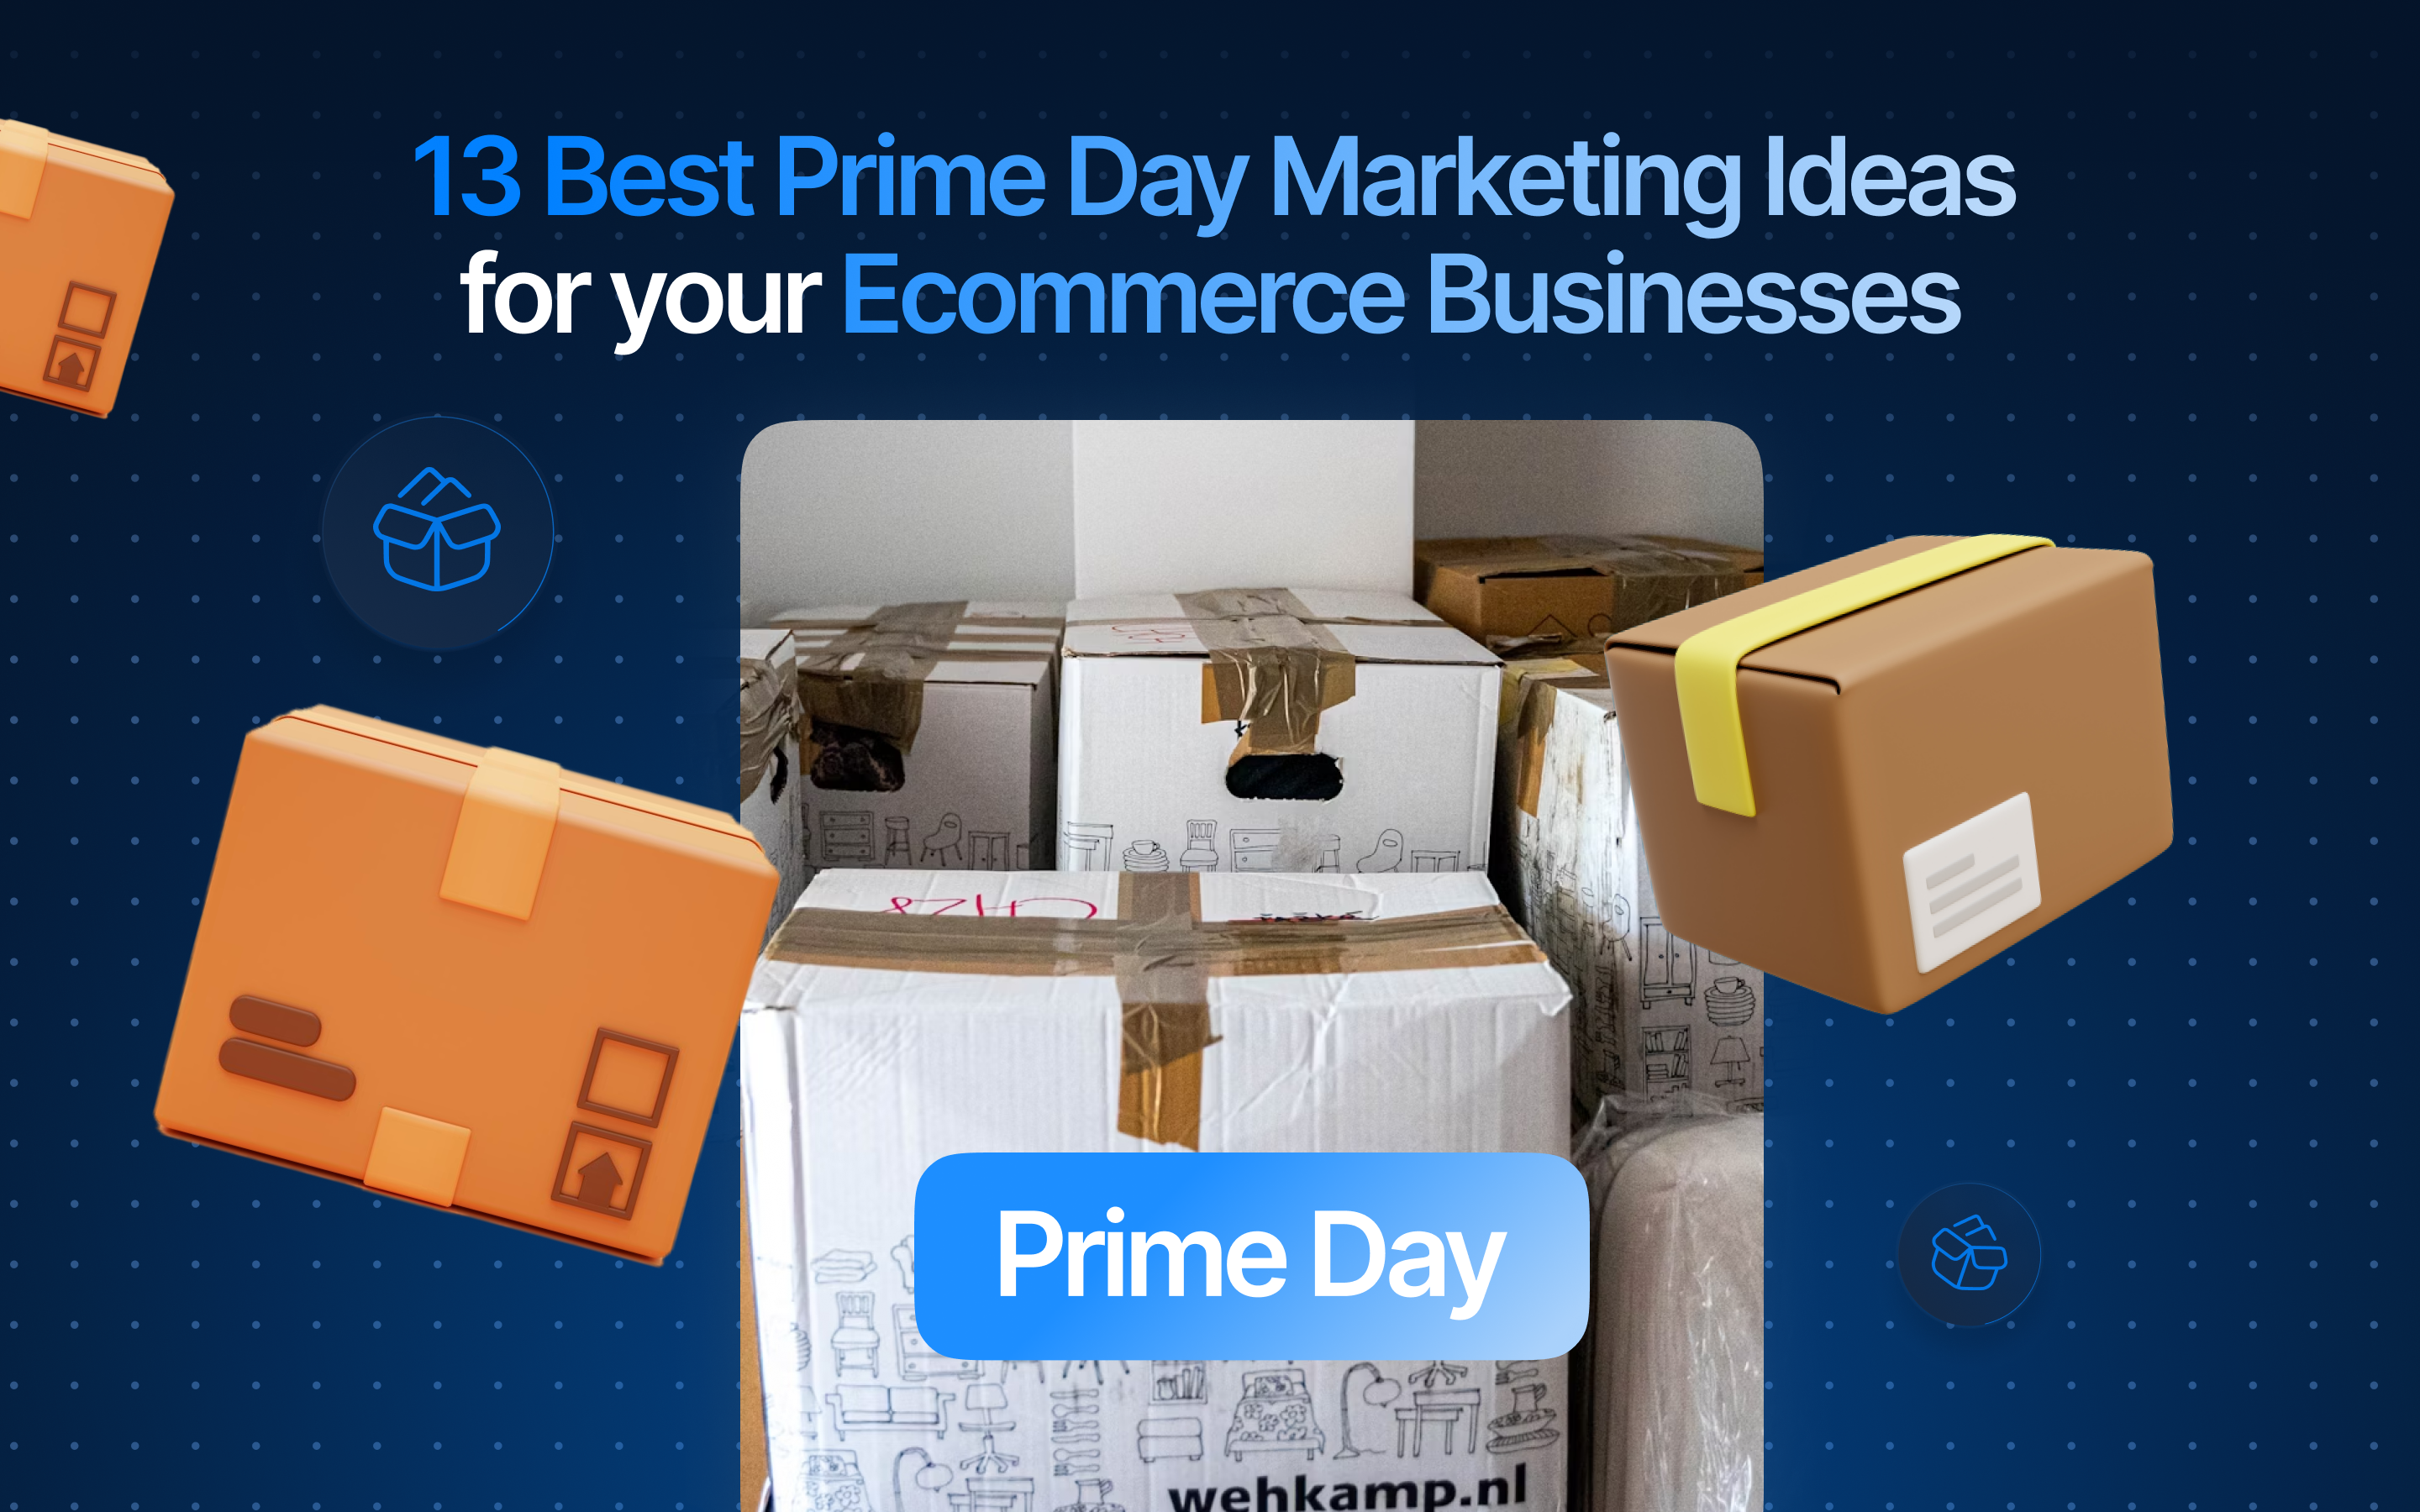 Best Prime Day Marketing Ideas for Ecommerce Businesses